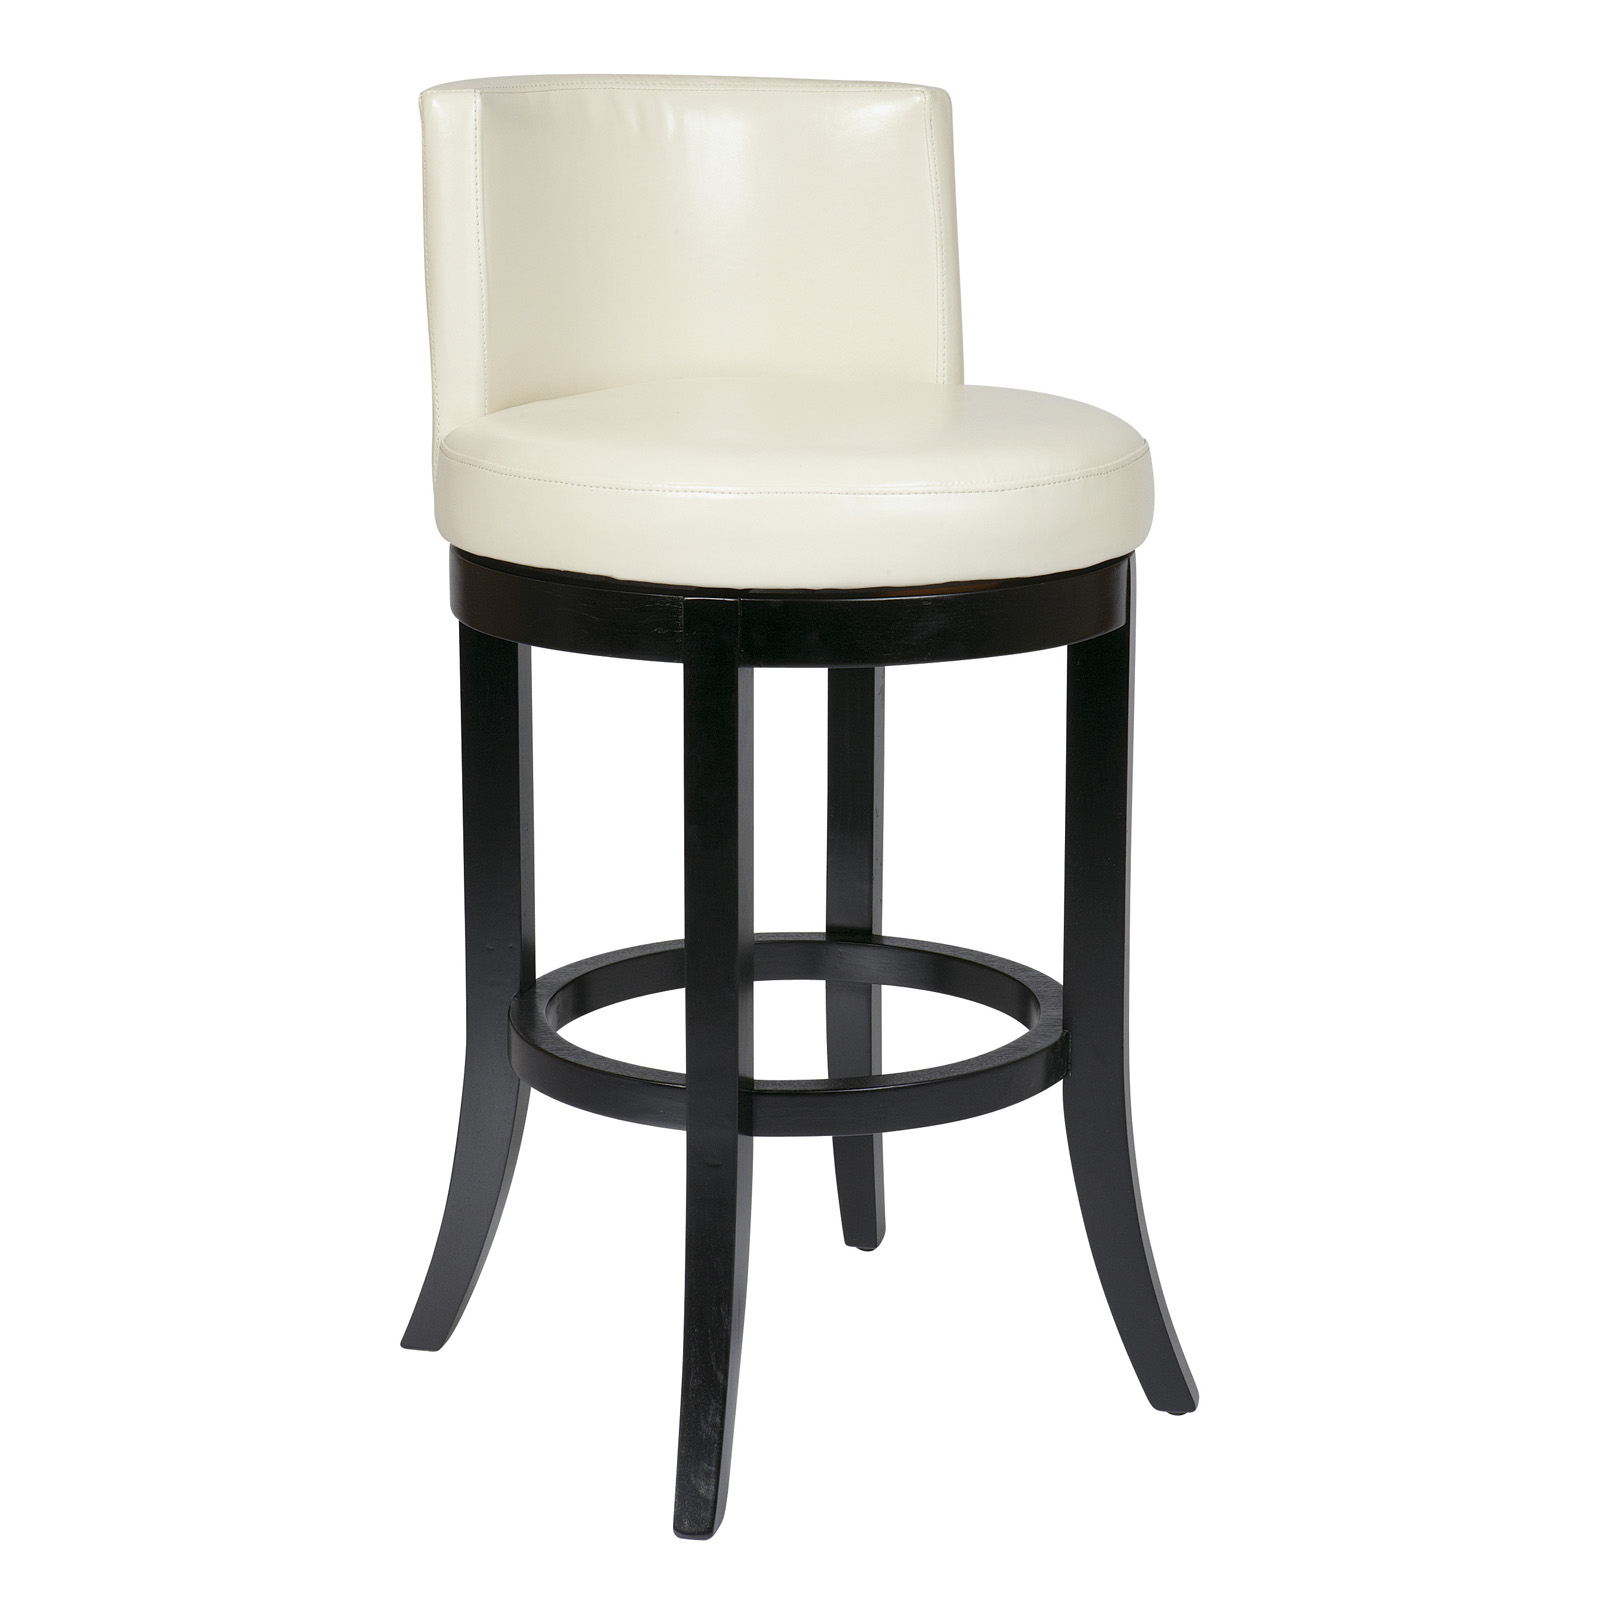 Office star metro 30 swivel eco leather bar stool in